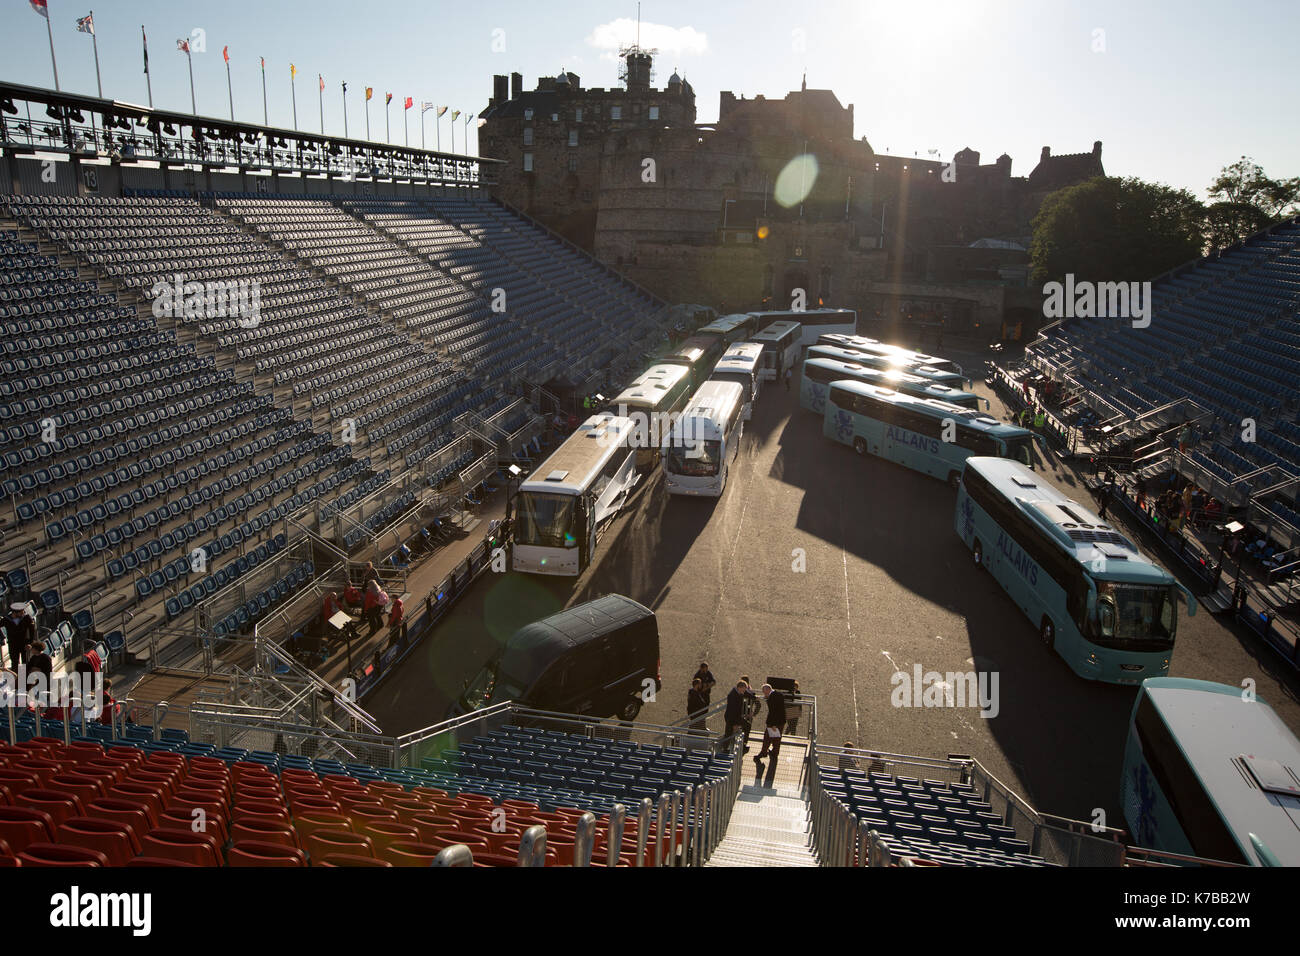 Military Tattoo Seating High Resolution Stock Photography and Images - Alamy